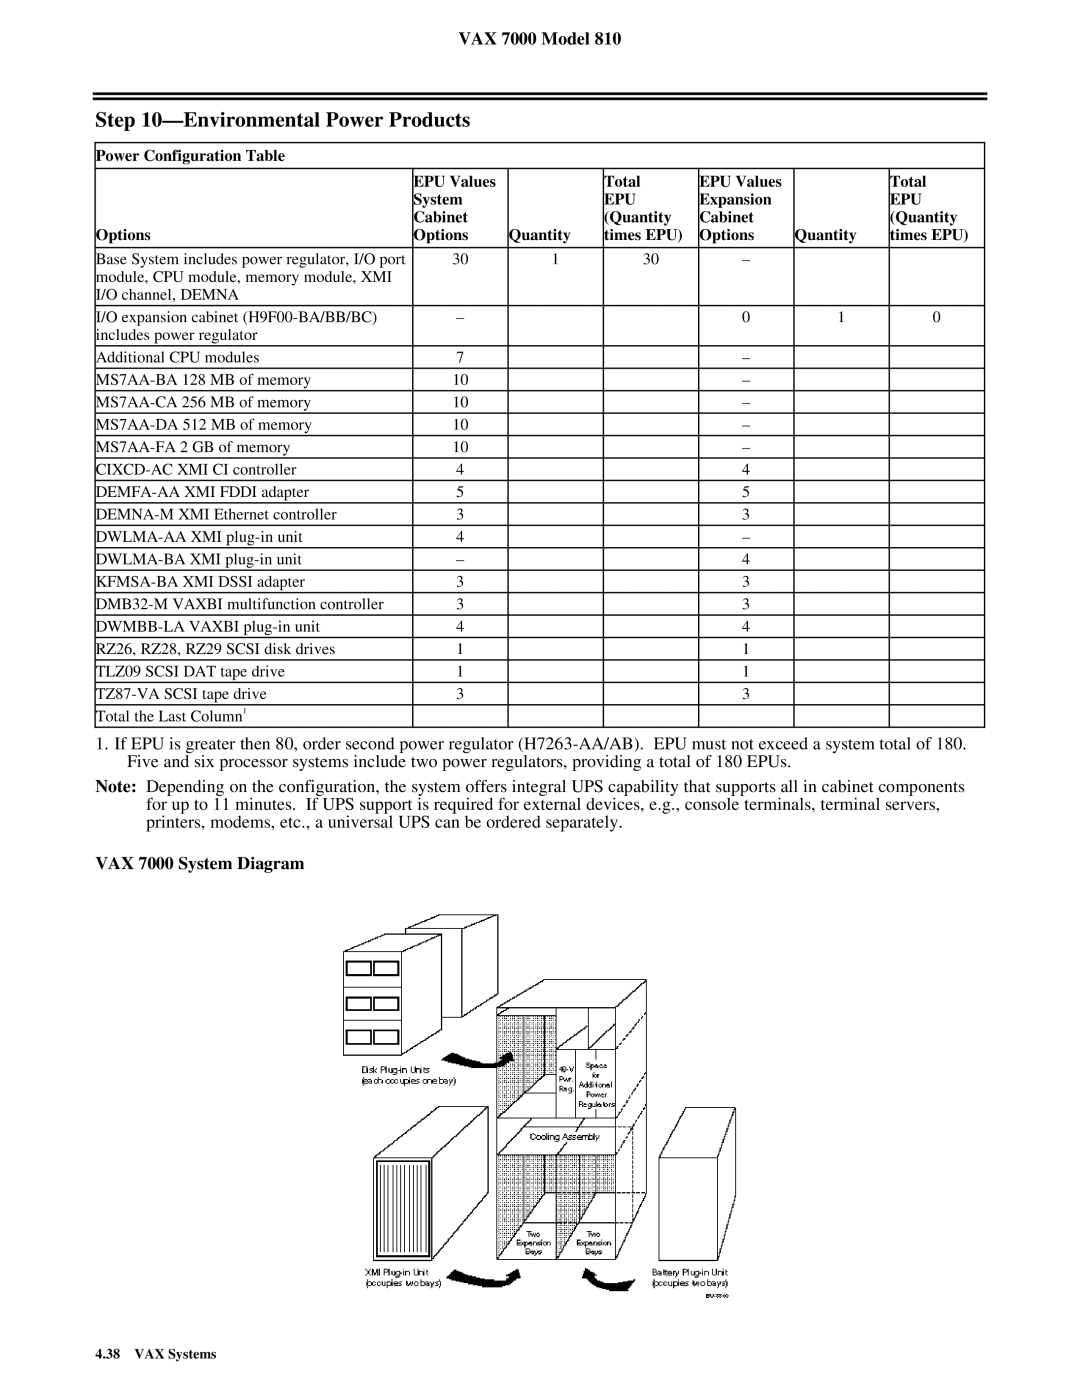 Compaq 810 dimensions Environmental Power Products, VAX 7000 System Diagram, VAX 7000 Model 